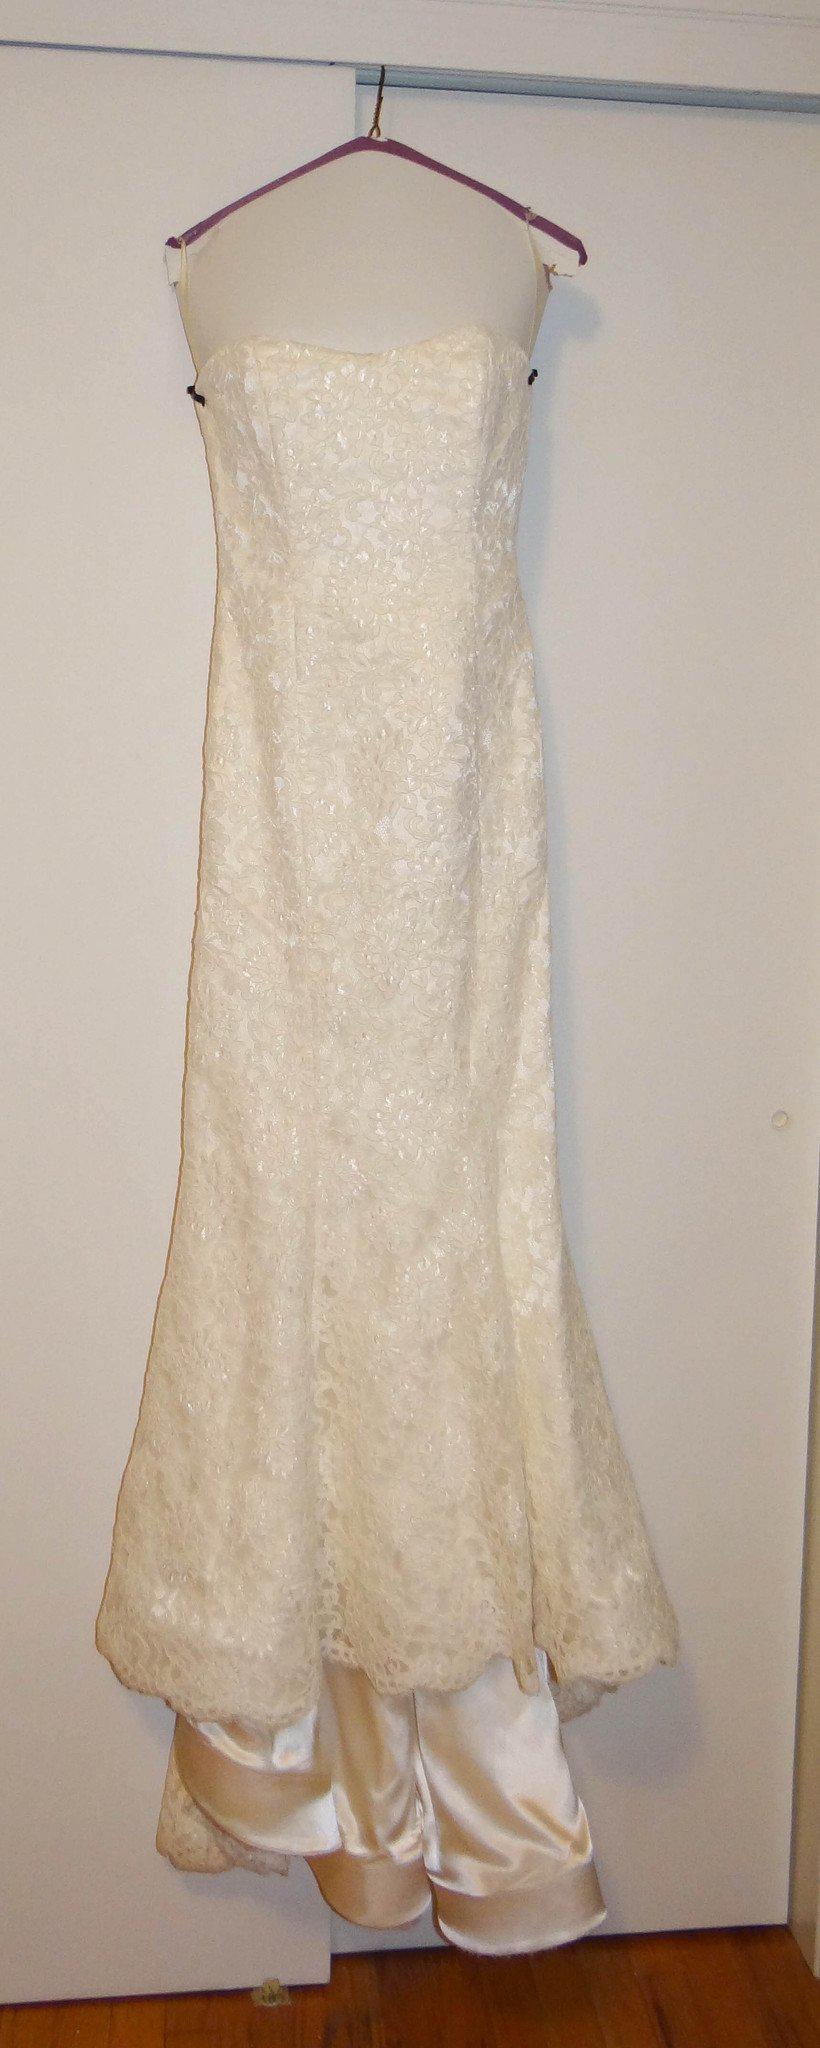 Michelle Roth Mermaid Alencon Lace Wedding Dress - Michelle Roth - Nearly Newlywed Bridal Boutique - 1